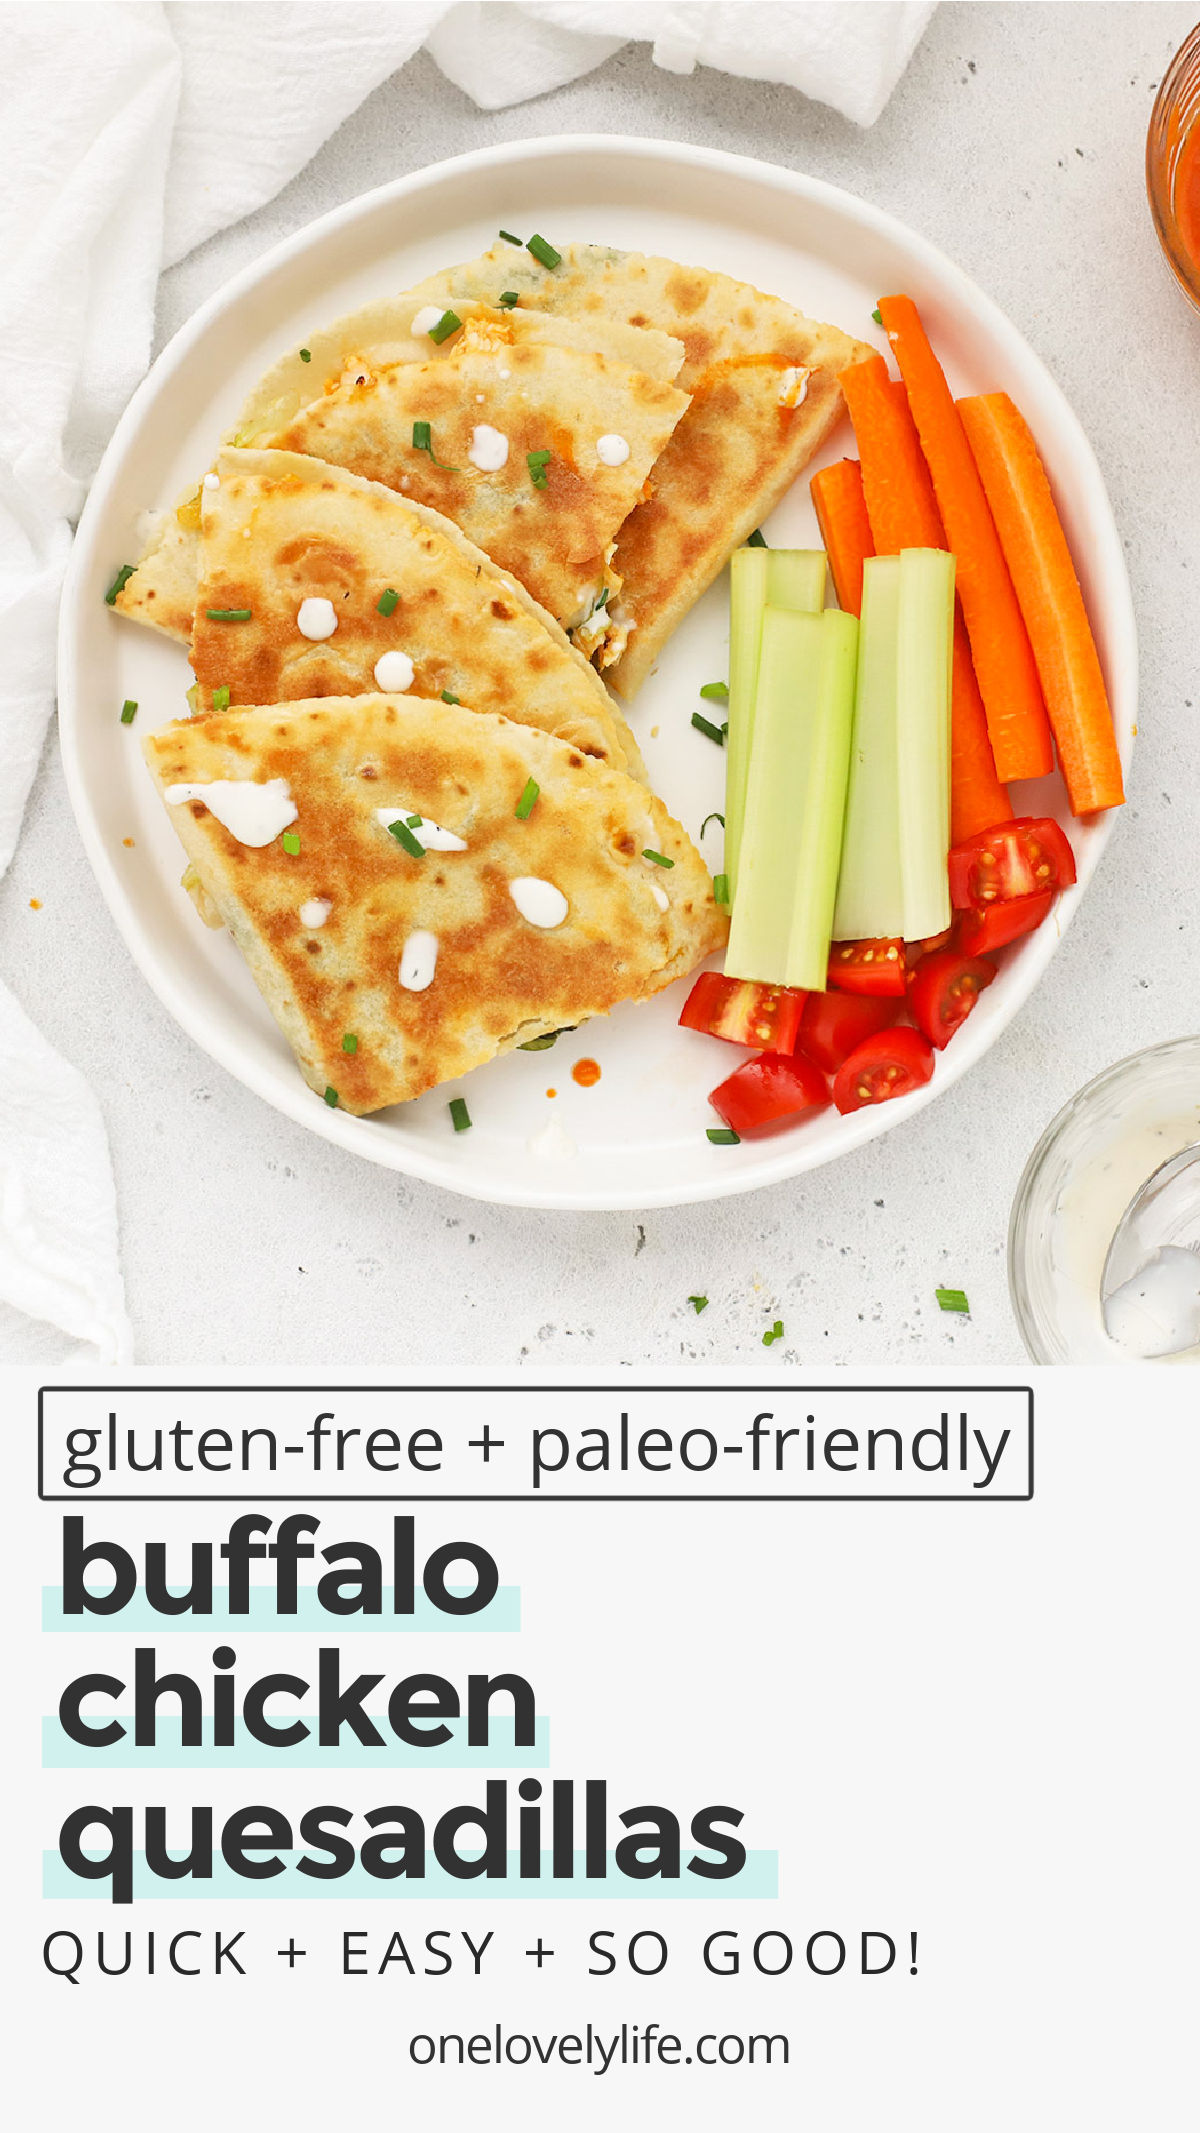 Buffalo Chicken Quesadillas - These gluten-free quesadillas are stuffed with Buffalo chicken, creamy ranch, lettuce, and your favorite cheese. They're quick, easy, and MAJORLY delicious! (Gluten-Free, Grain-Free Friendly // Buffalo Quesadillas // Buffalo Chicken Recipes #quesadillas #glutenfree #buffalochicken